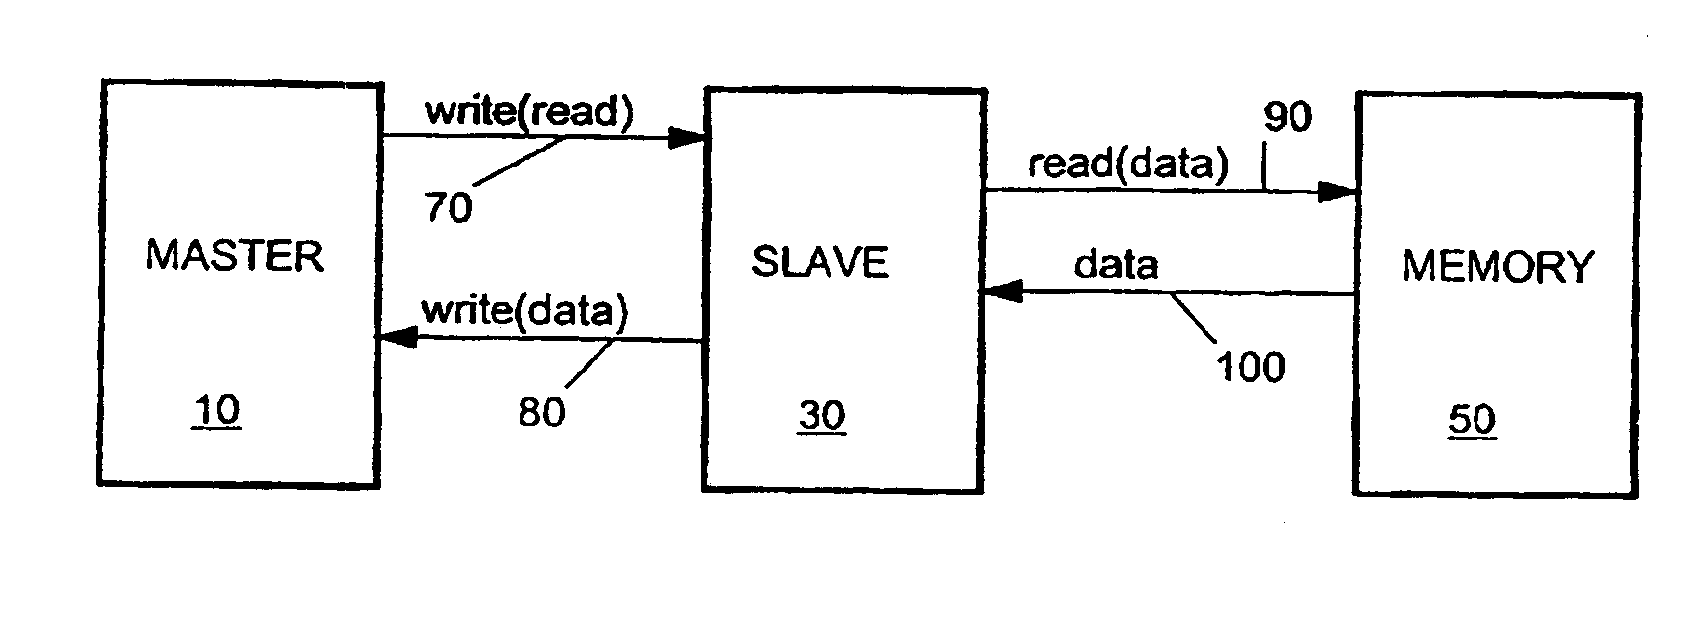 Data processing system with master and slave processors